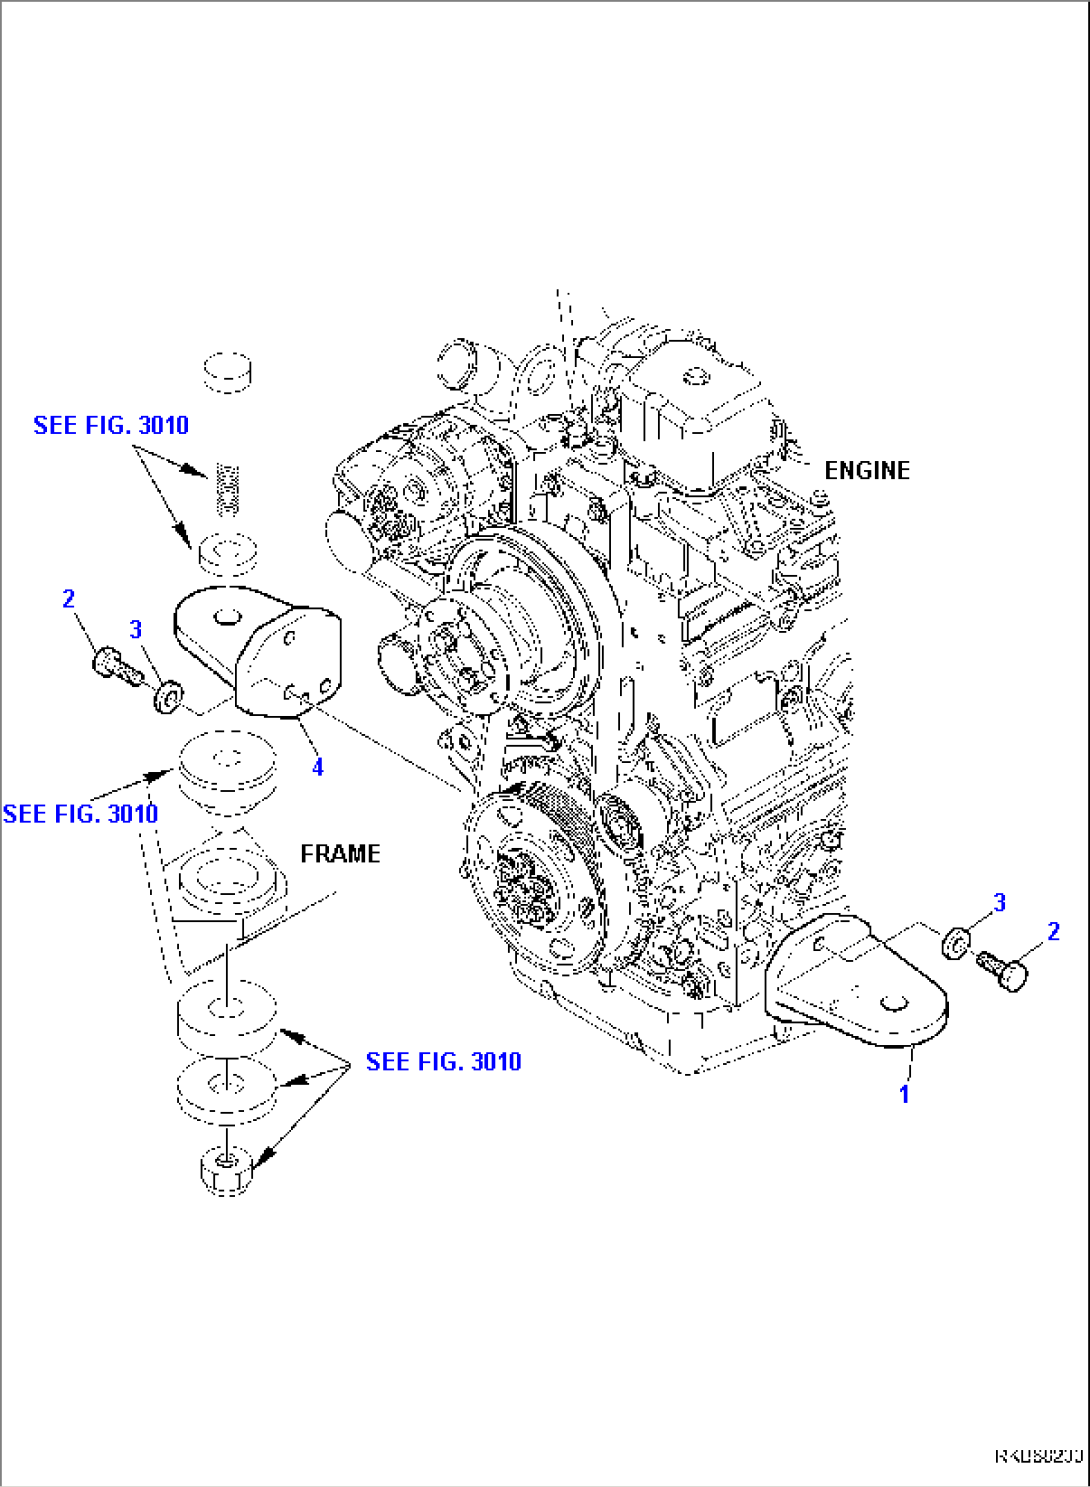 ENGINE (MOUNTING PARTS)